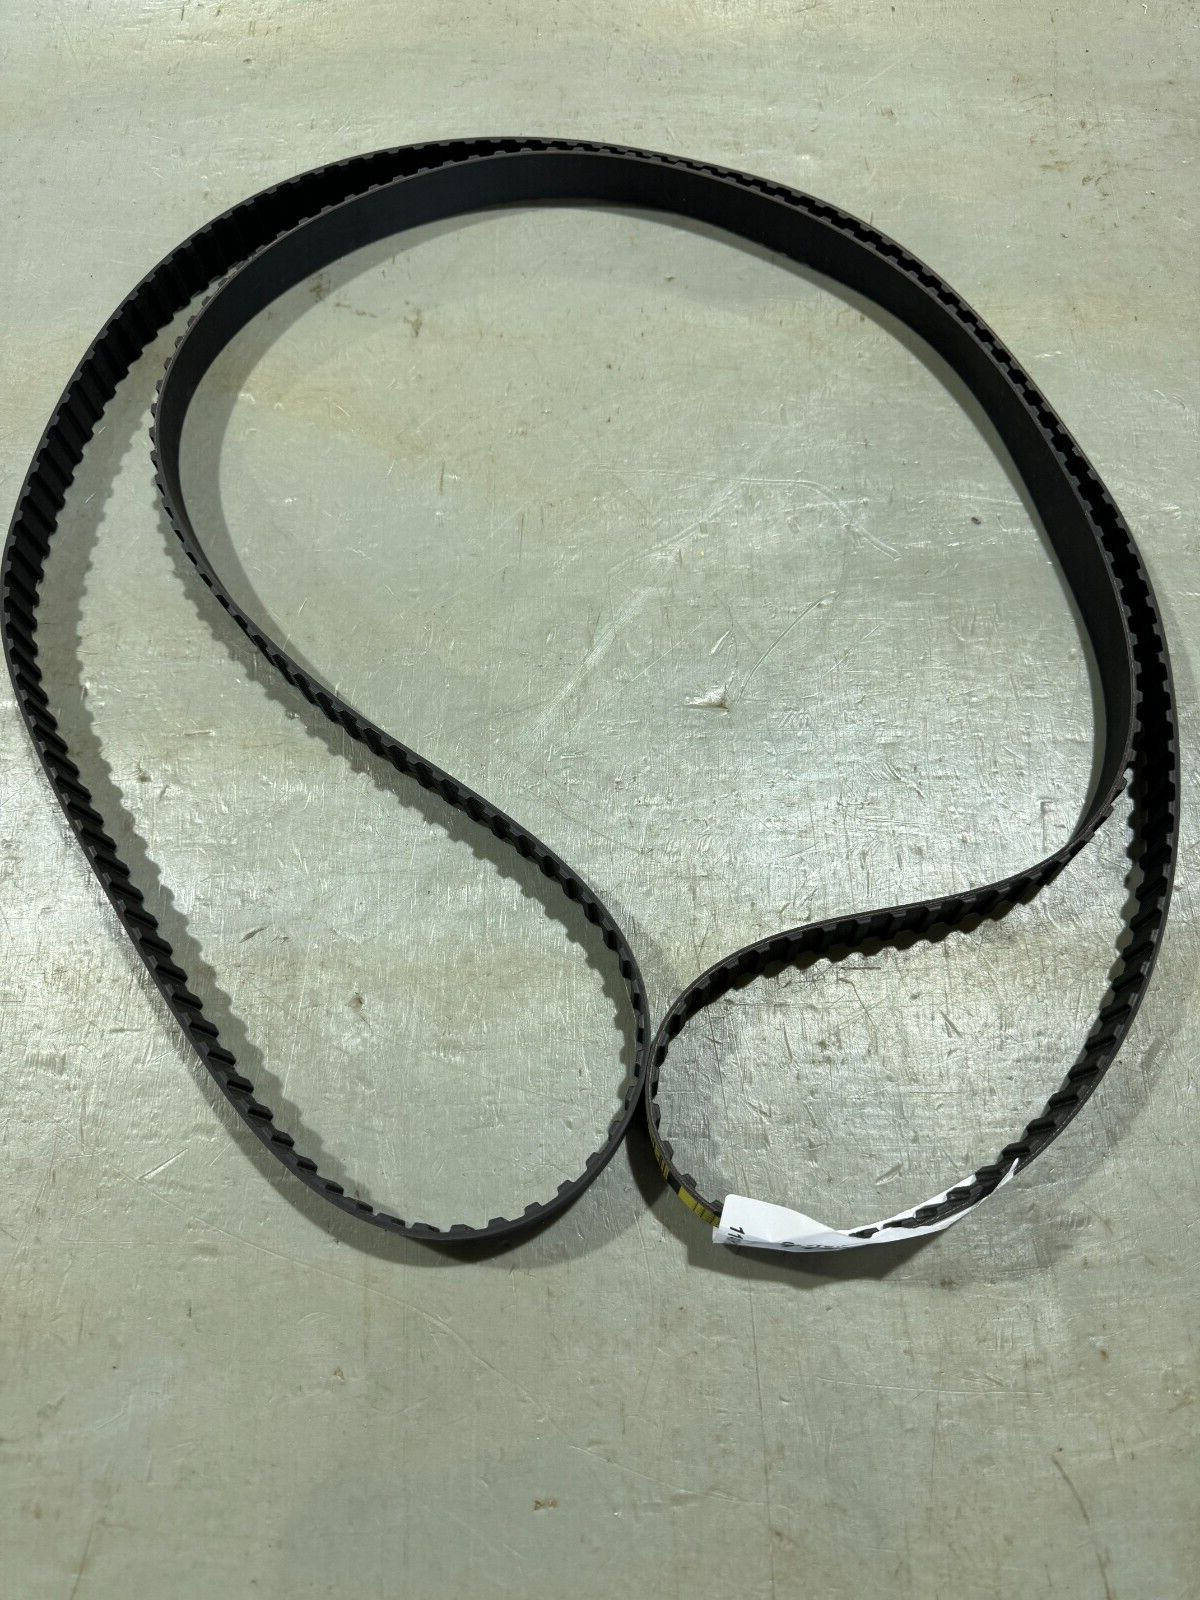 FACTORY NEW GOODYEAR SYNCHRONOUS Trapezoidal TIMING BELT 1140H100